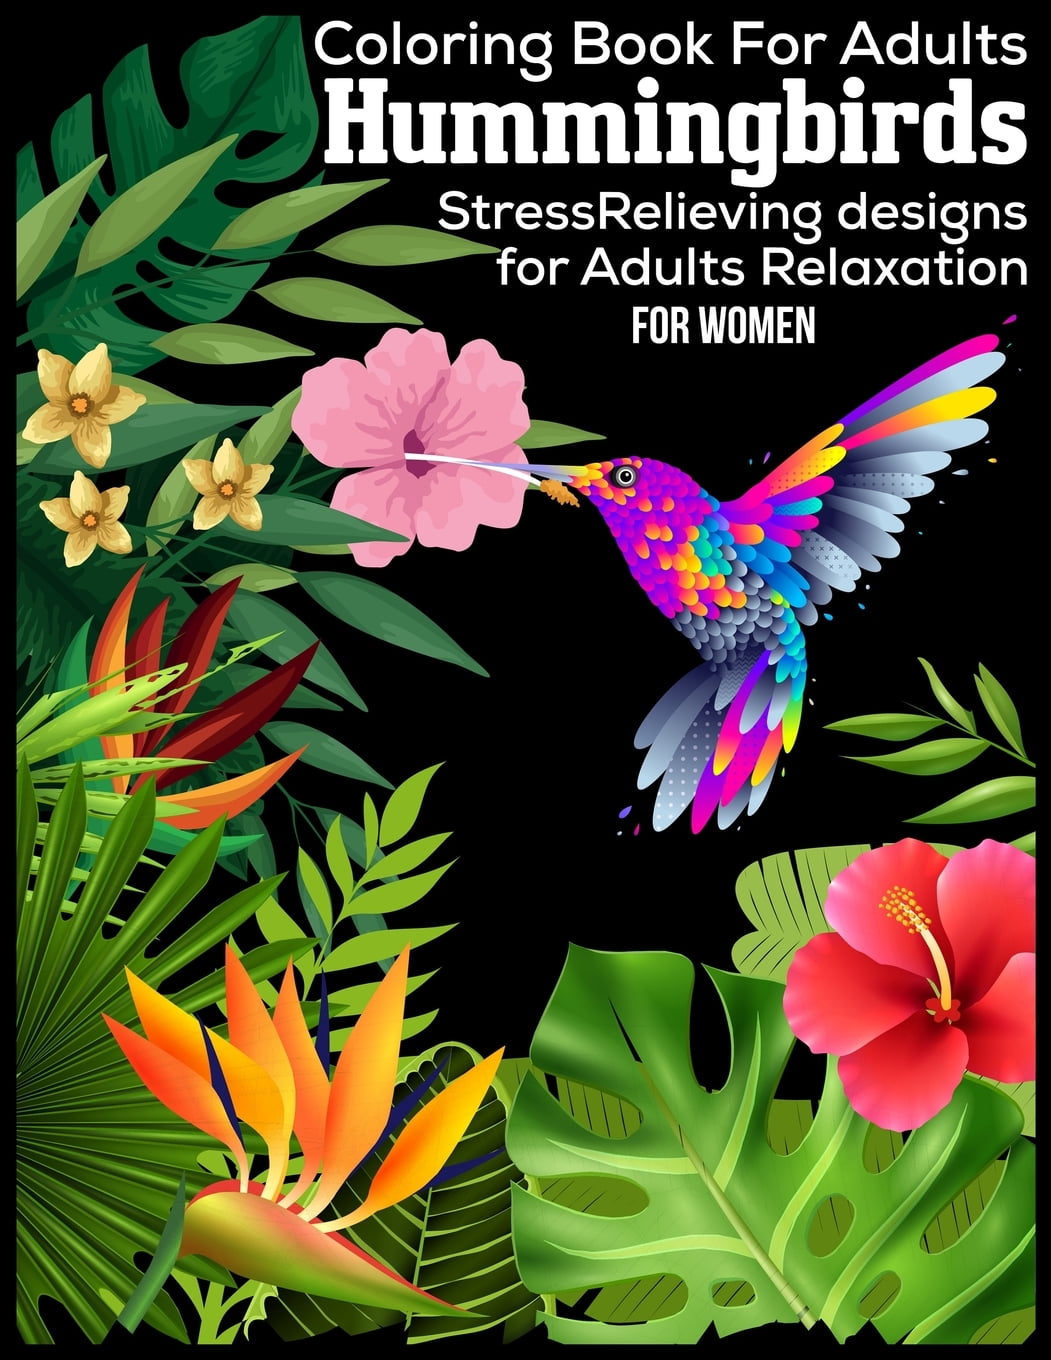 Download Coloring Book For Adults Hummingbirds StressRelieving Designs For Adults Relaxation For Women ...